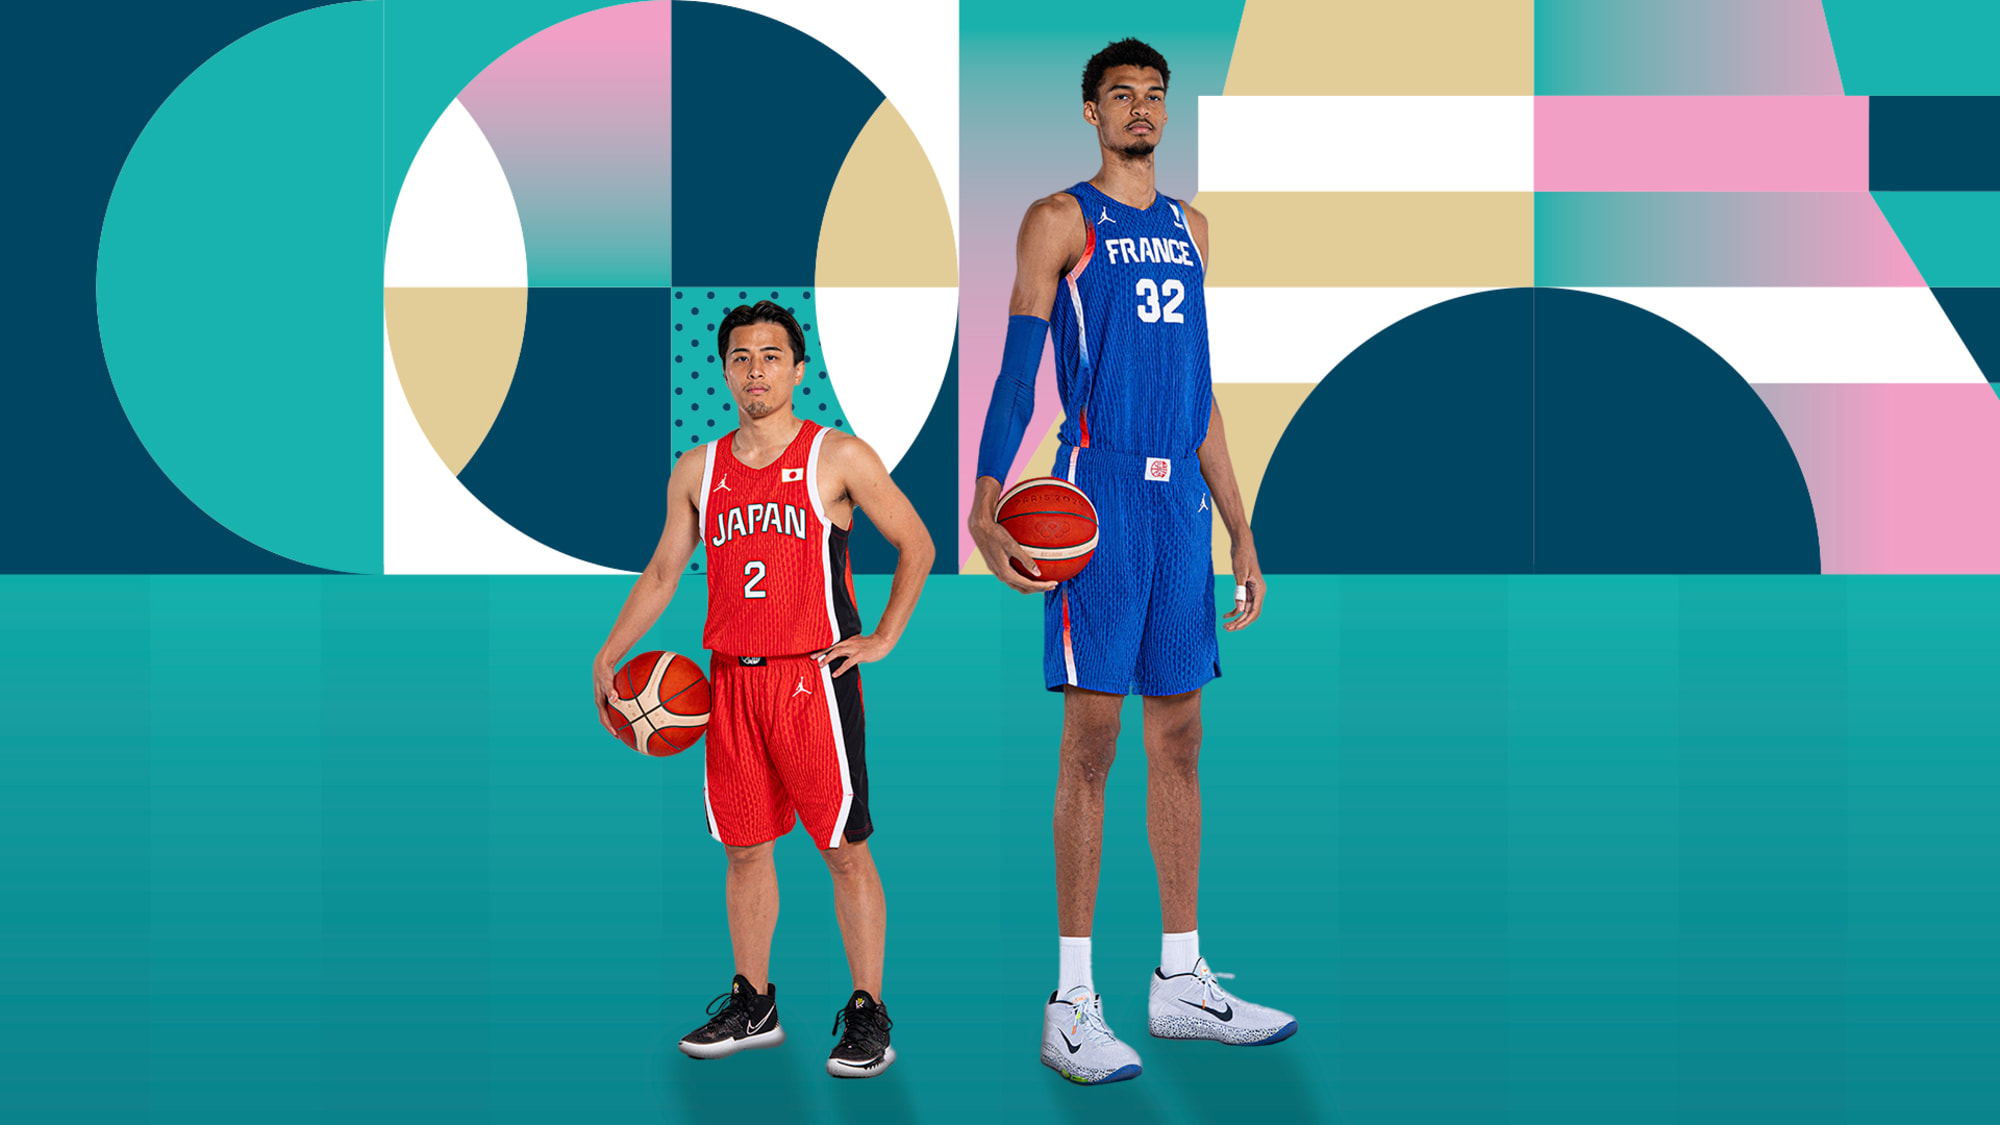 Who are the tallest, shortest, youngest, oldest players at the Olympics?